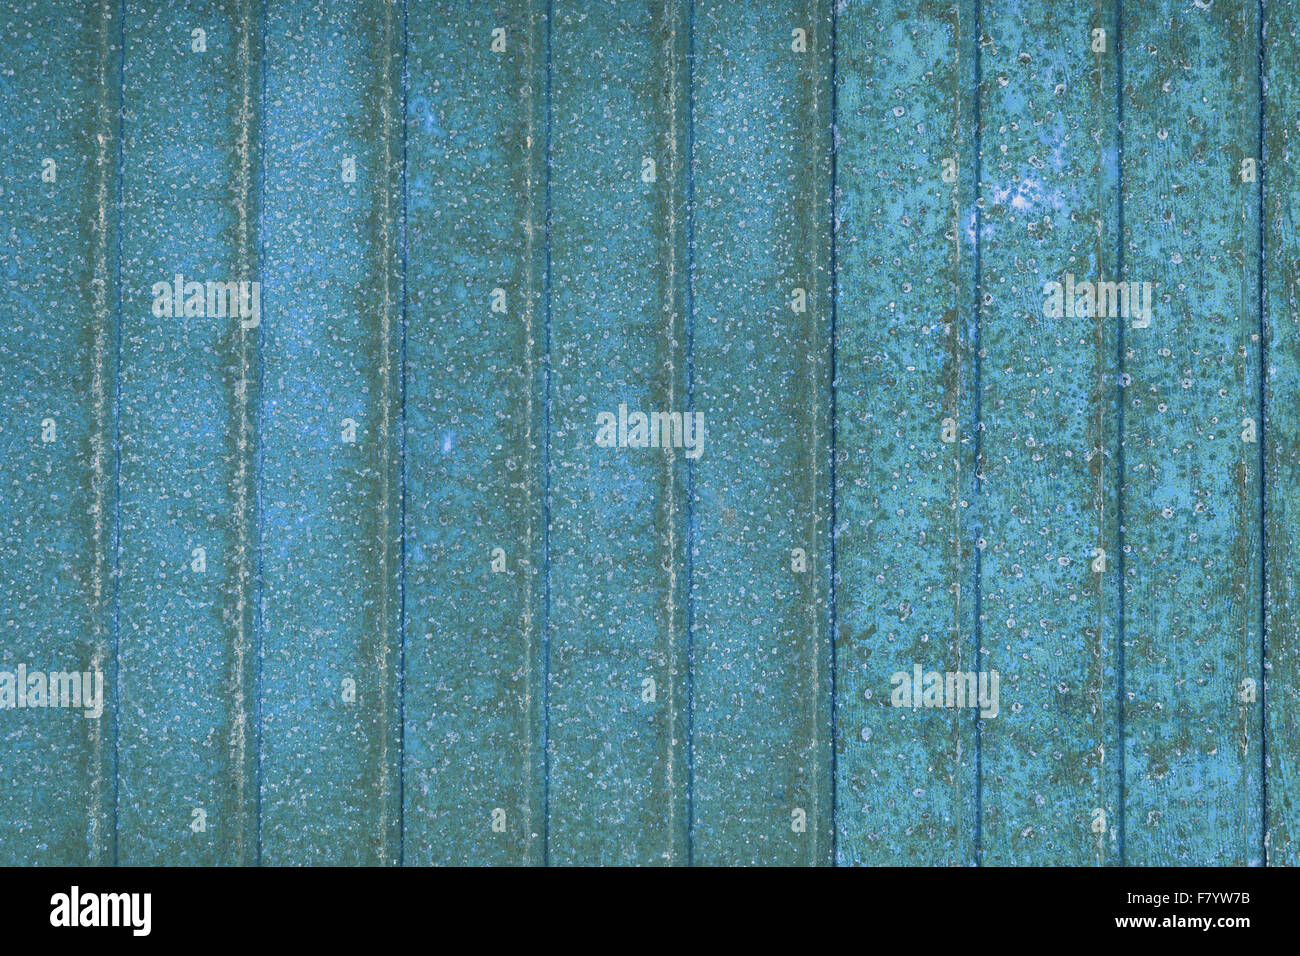 aged rusted metal background - striped rusty texture - abstract light blue Stock Photo